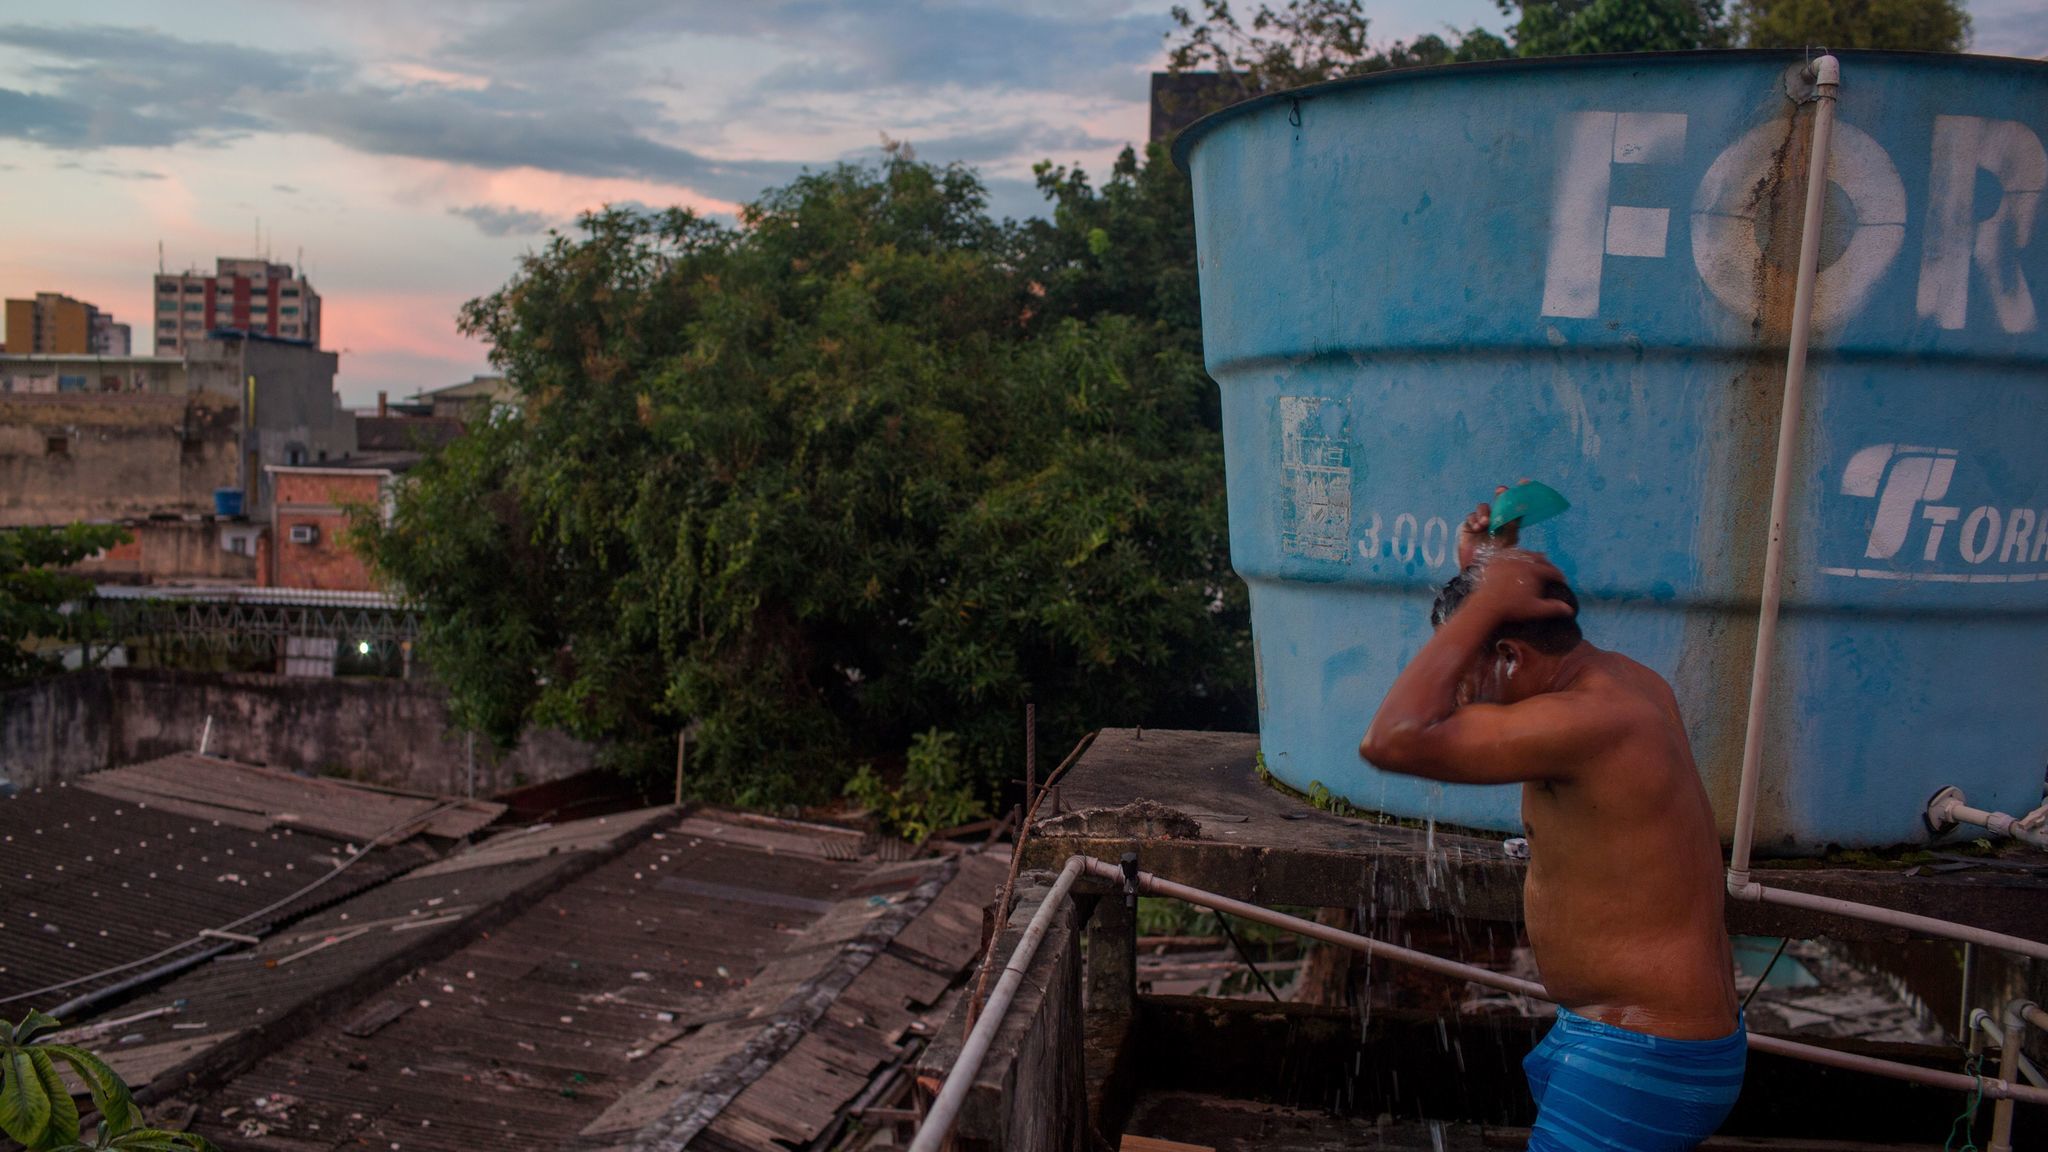 A Warao man bathes on a rooftop in Manaus, Brazil. About 350 Warao Indians live in public squares and old mansions in central Manaus.